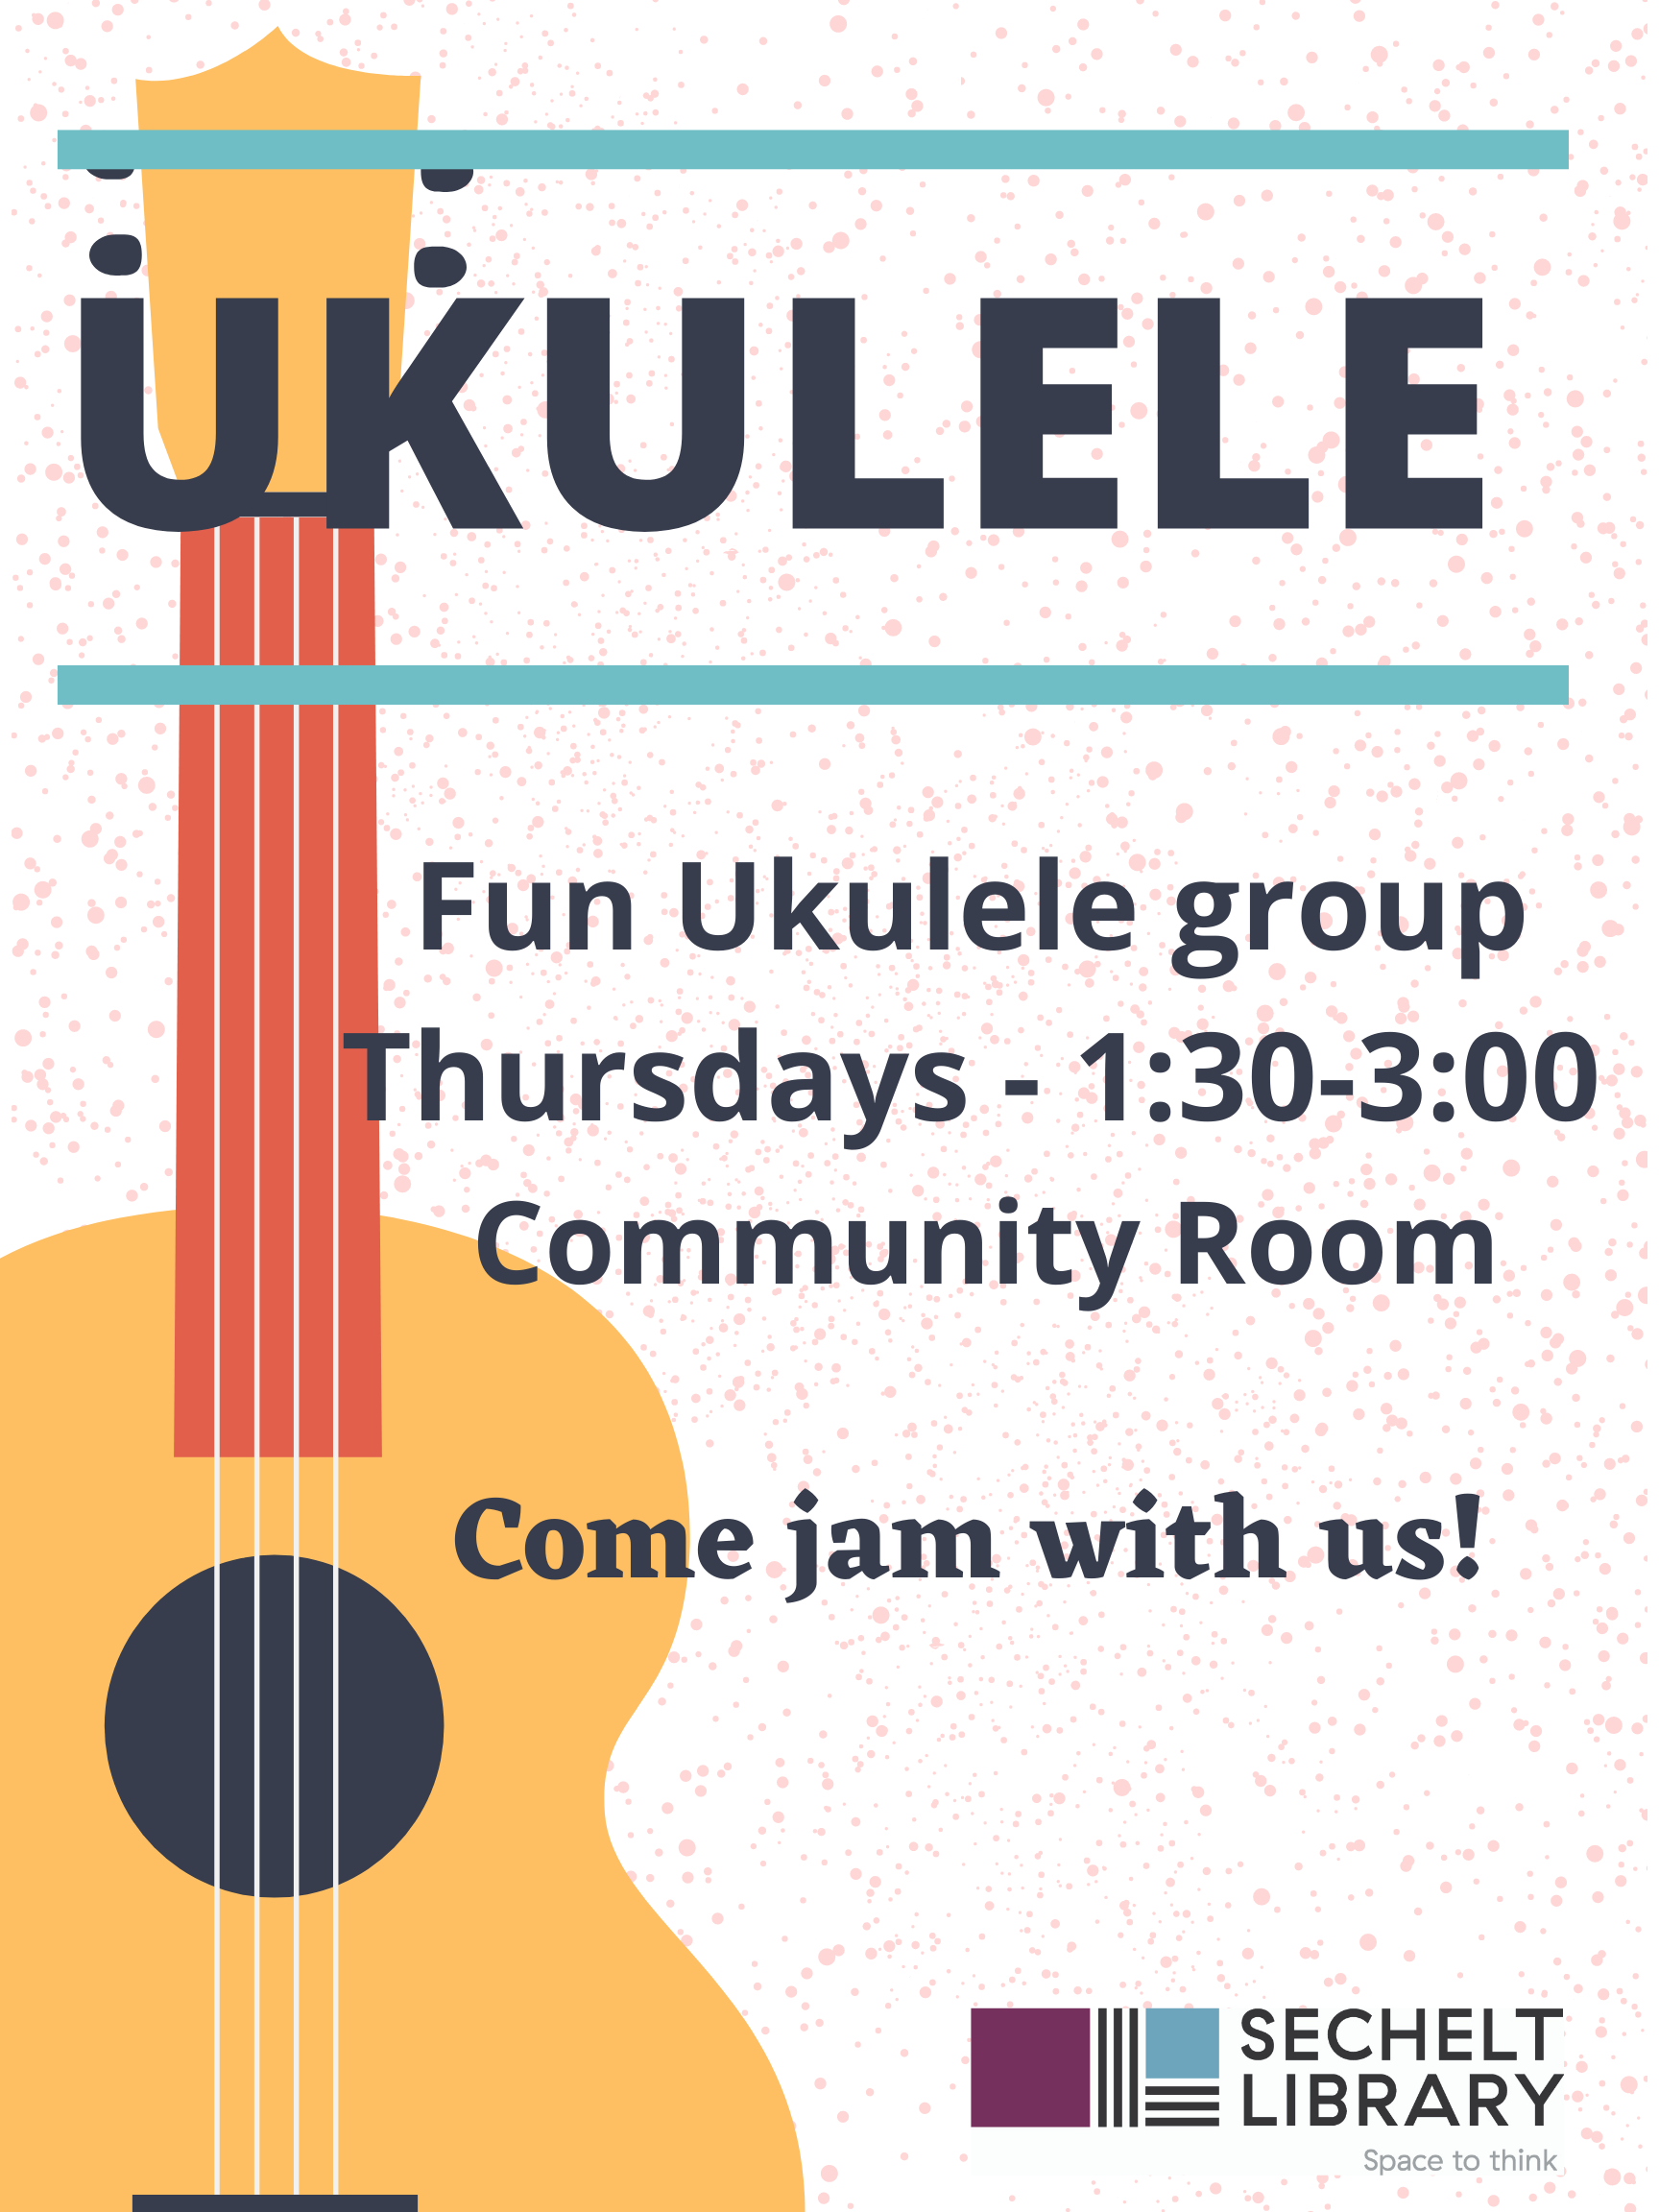 opens poster for Ukulele Jam - Thursdays from April 7 through April 28 between 1:30pm and 3:00pm